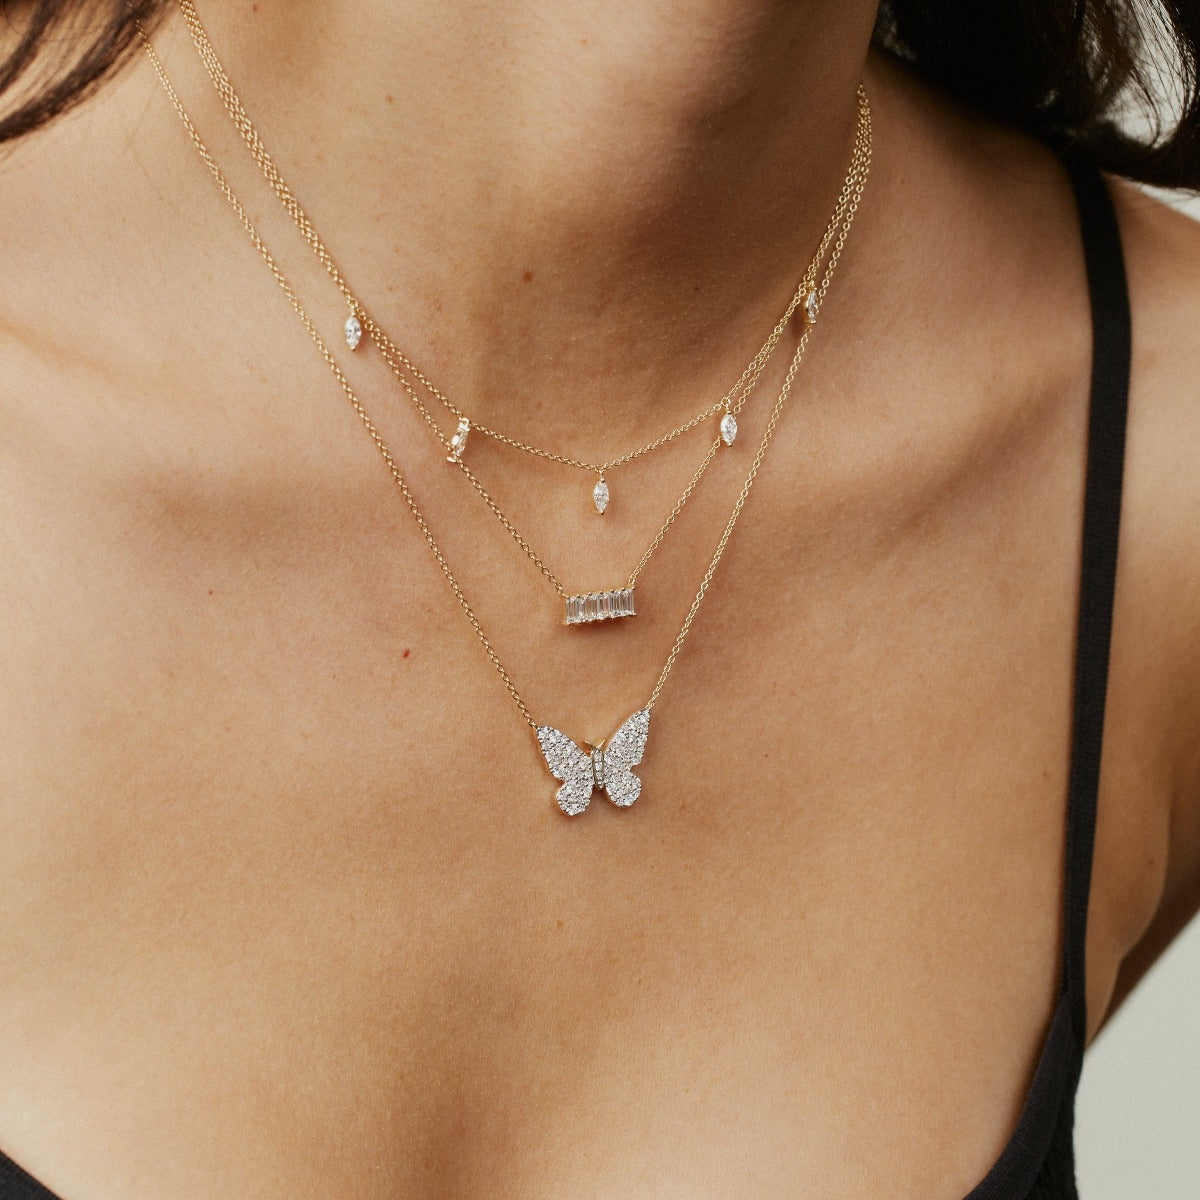 Butterfly Simulated Diamond Necklace for Women | U.S Lax Jewelry